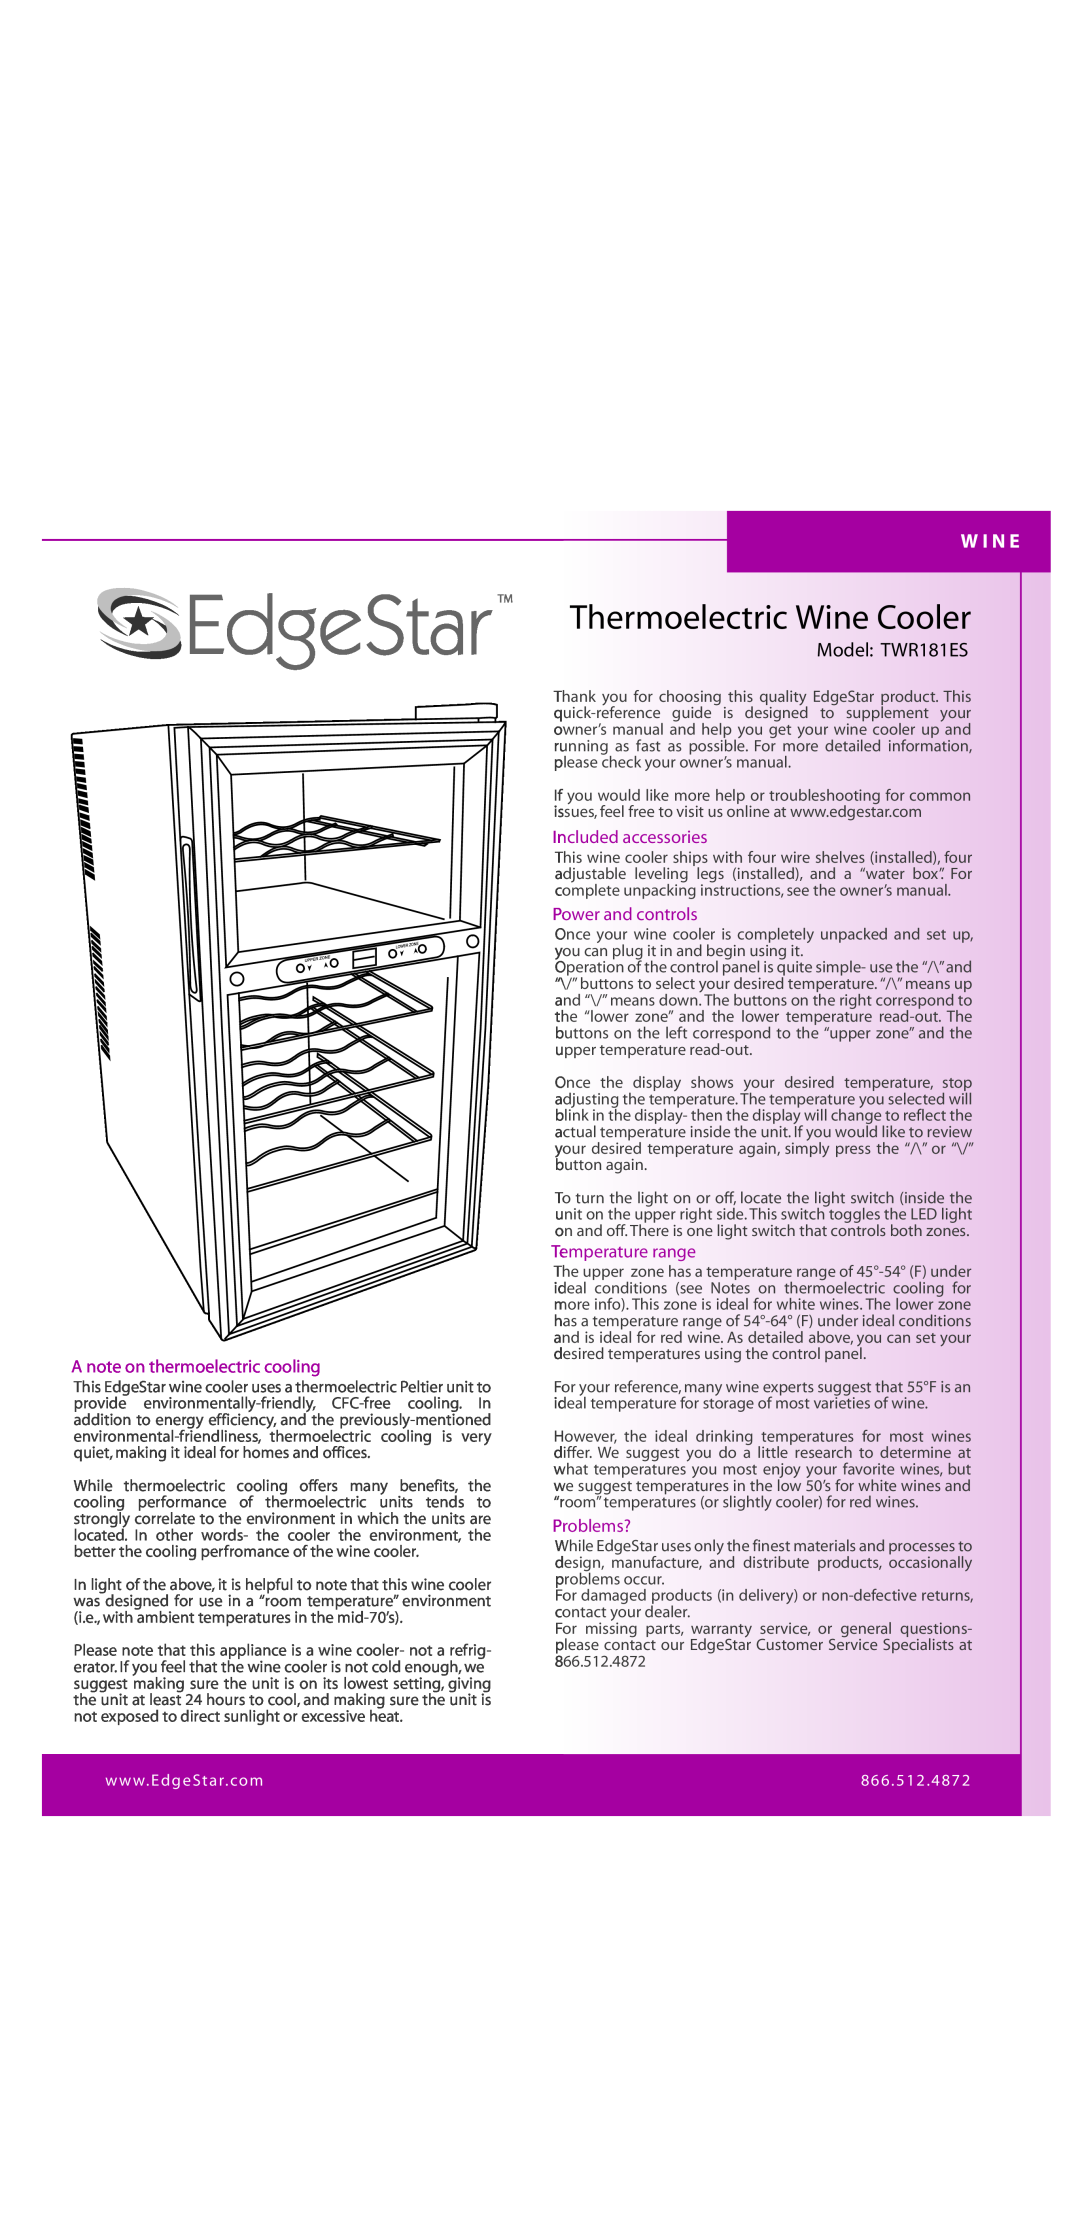 EdgeStar owner manual Thermoelectric Wine Cooler, W I N E, Model TWR181ES, A note on thermoelectric cooling, Problems? 